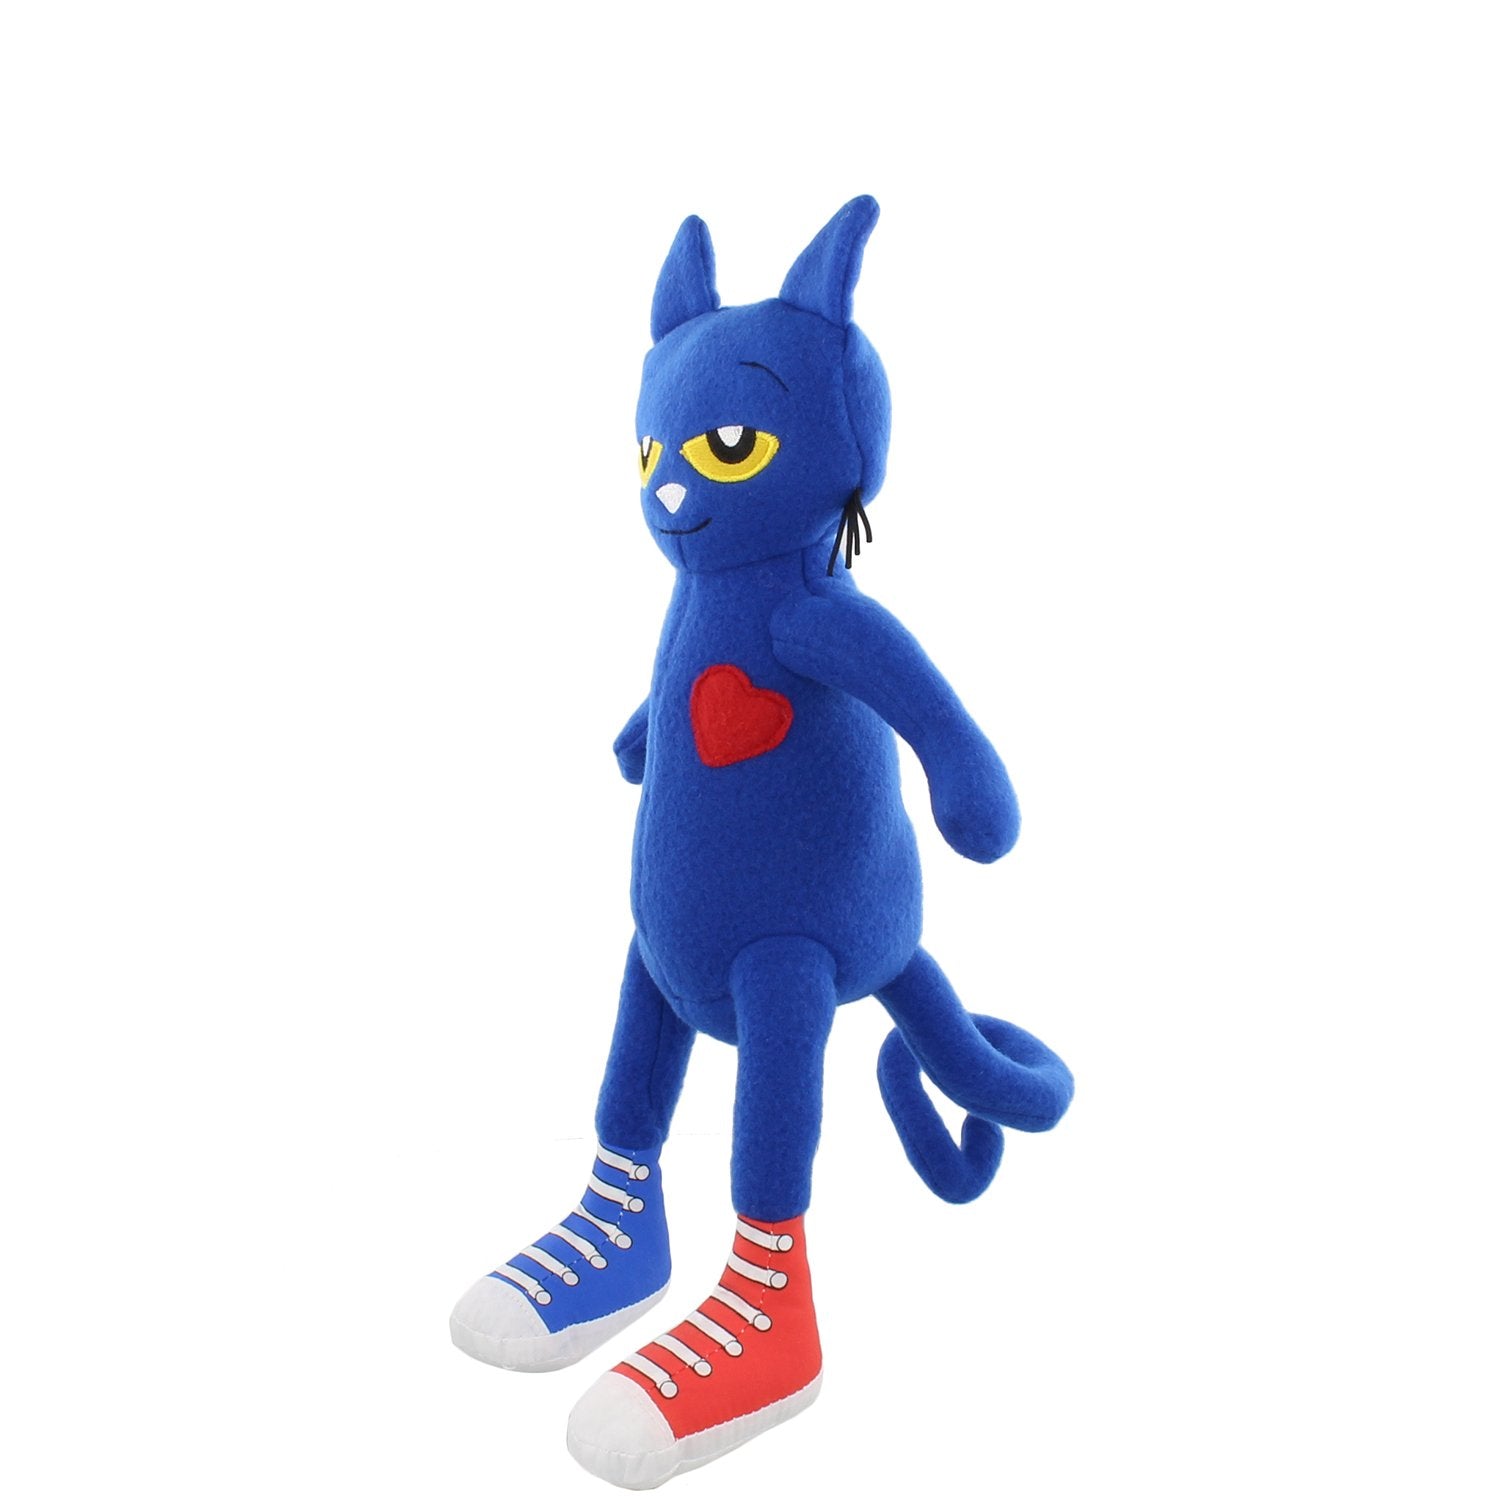 MerryMakers Pete the Cat Plush Doll, 14.5-Inch , Blue